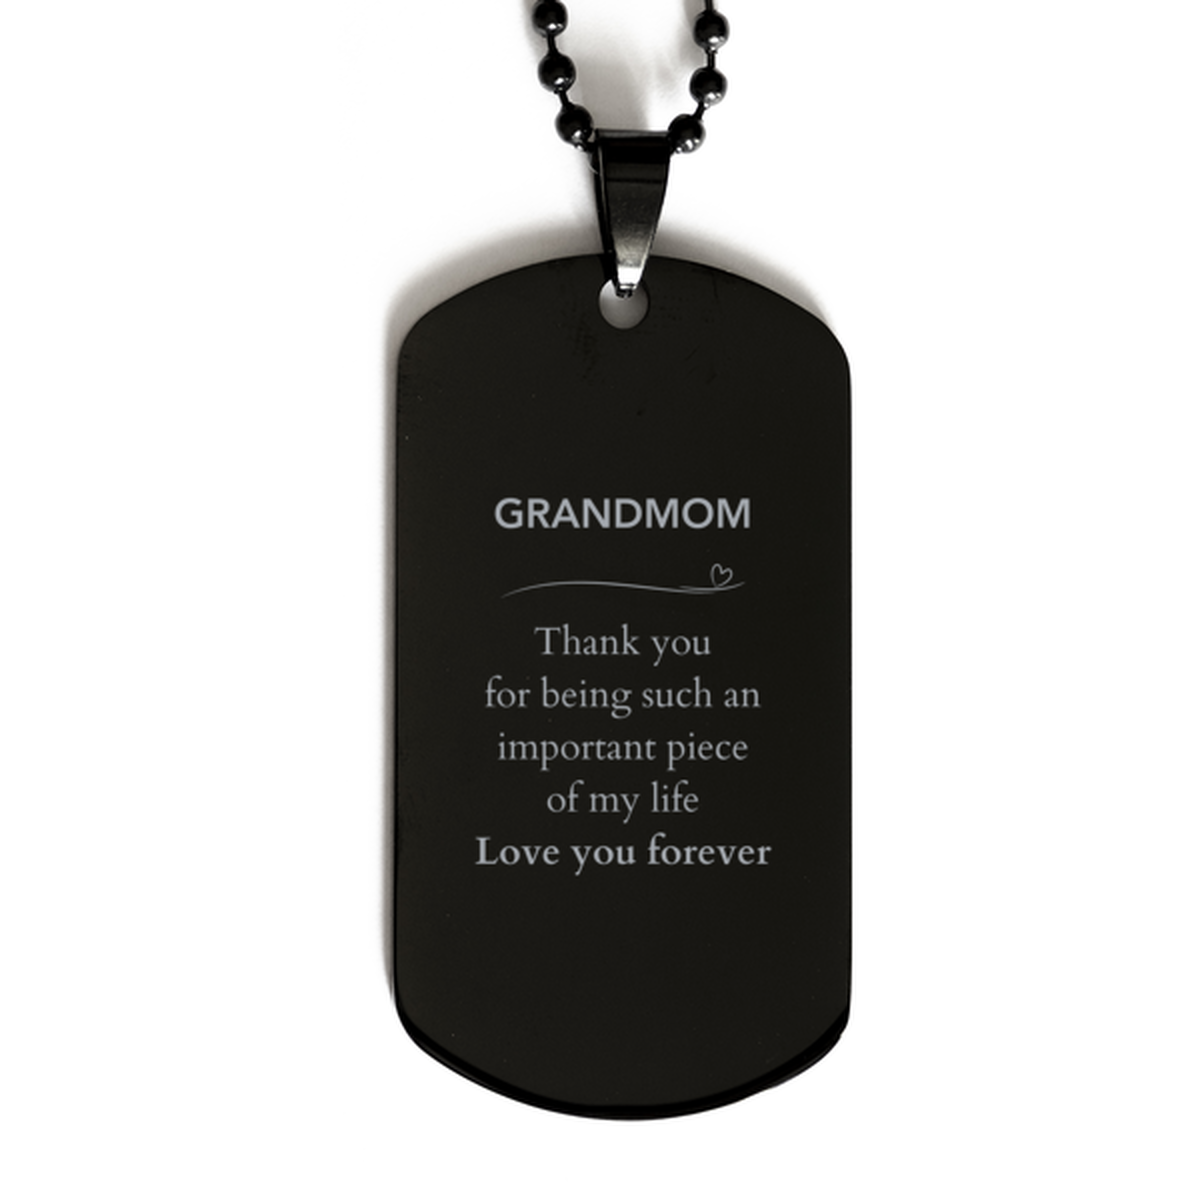 Appropriate Grandmom Black Dog Tag Epic Birthday Gifts for Grandmom Thank you for being such an important piece of my life Grandmom Christmas Mothers Fathers Day